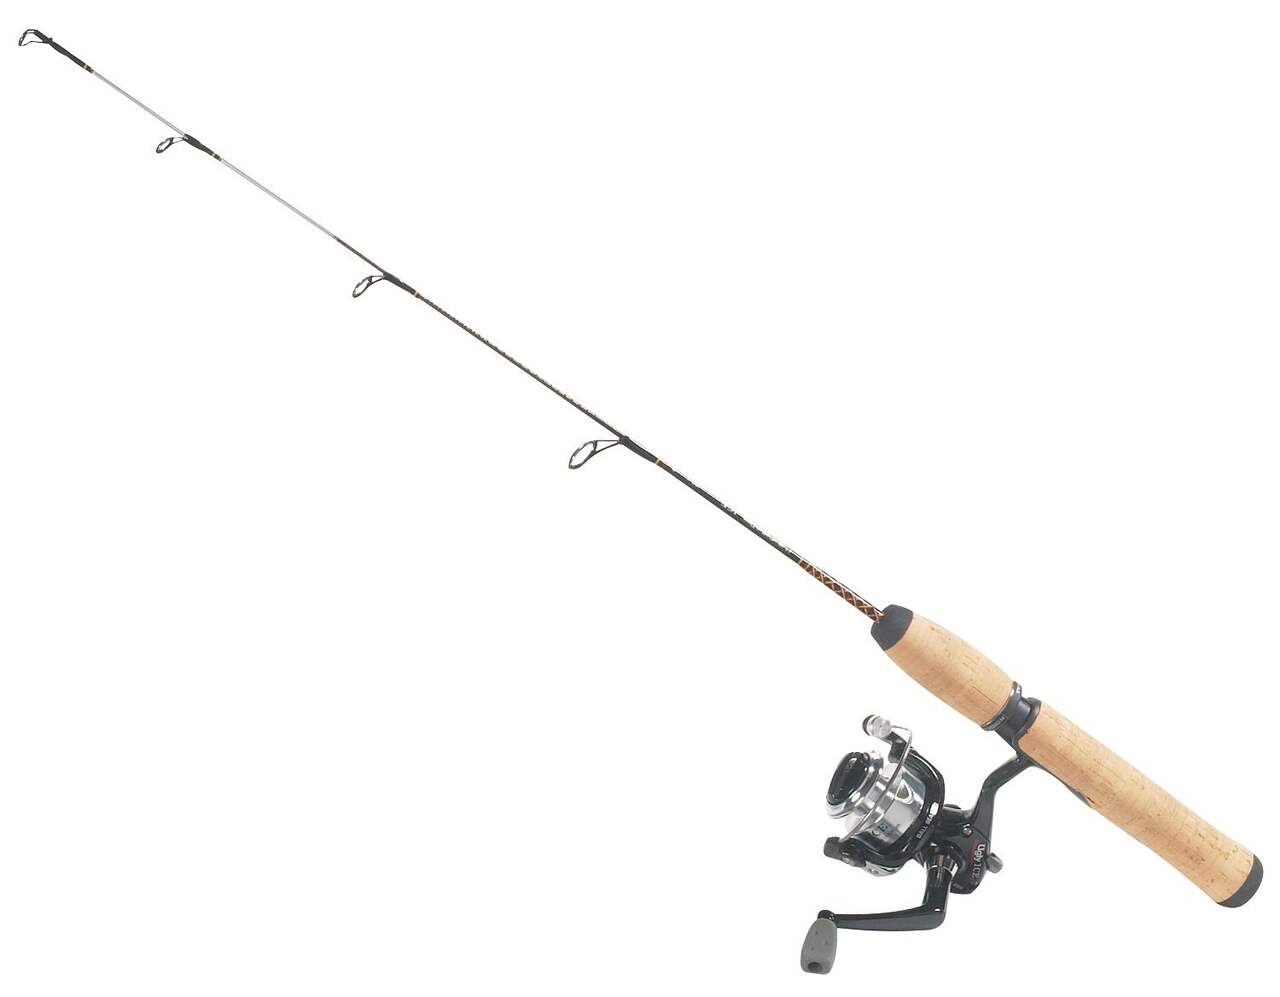 https://media-www.canadiantire.ca/product/playing/fishing/ice-fishing/0786965/ugly-stik-30-ice-fishing-combo-d557e063-50f7-40e9-8f98-b39fdfbae284-jpgrendition.jpg?imdensity=1&imwidth=640&impolicy=mZoom